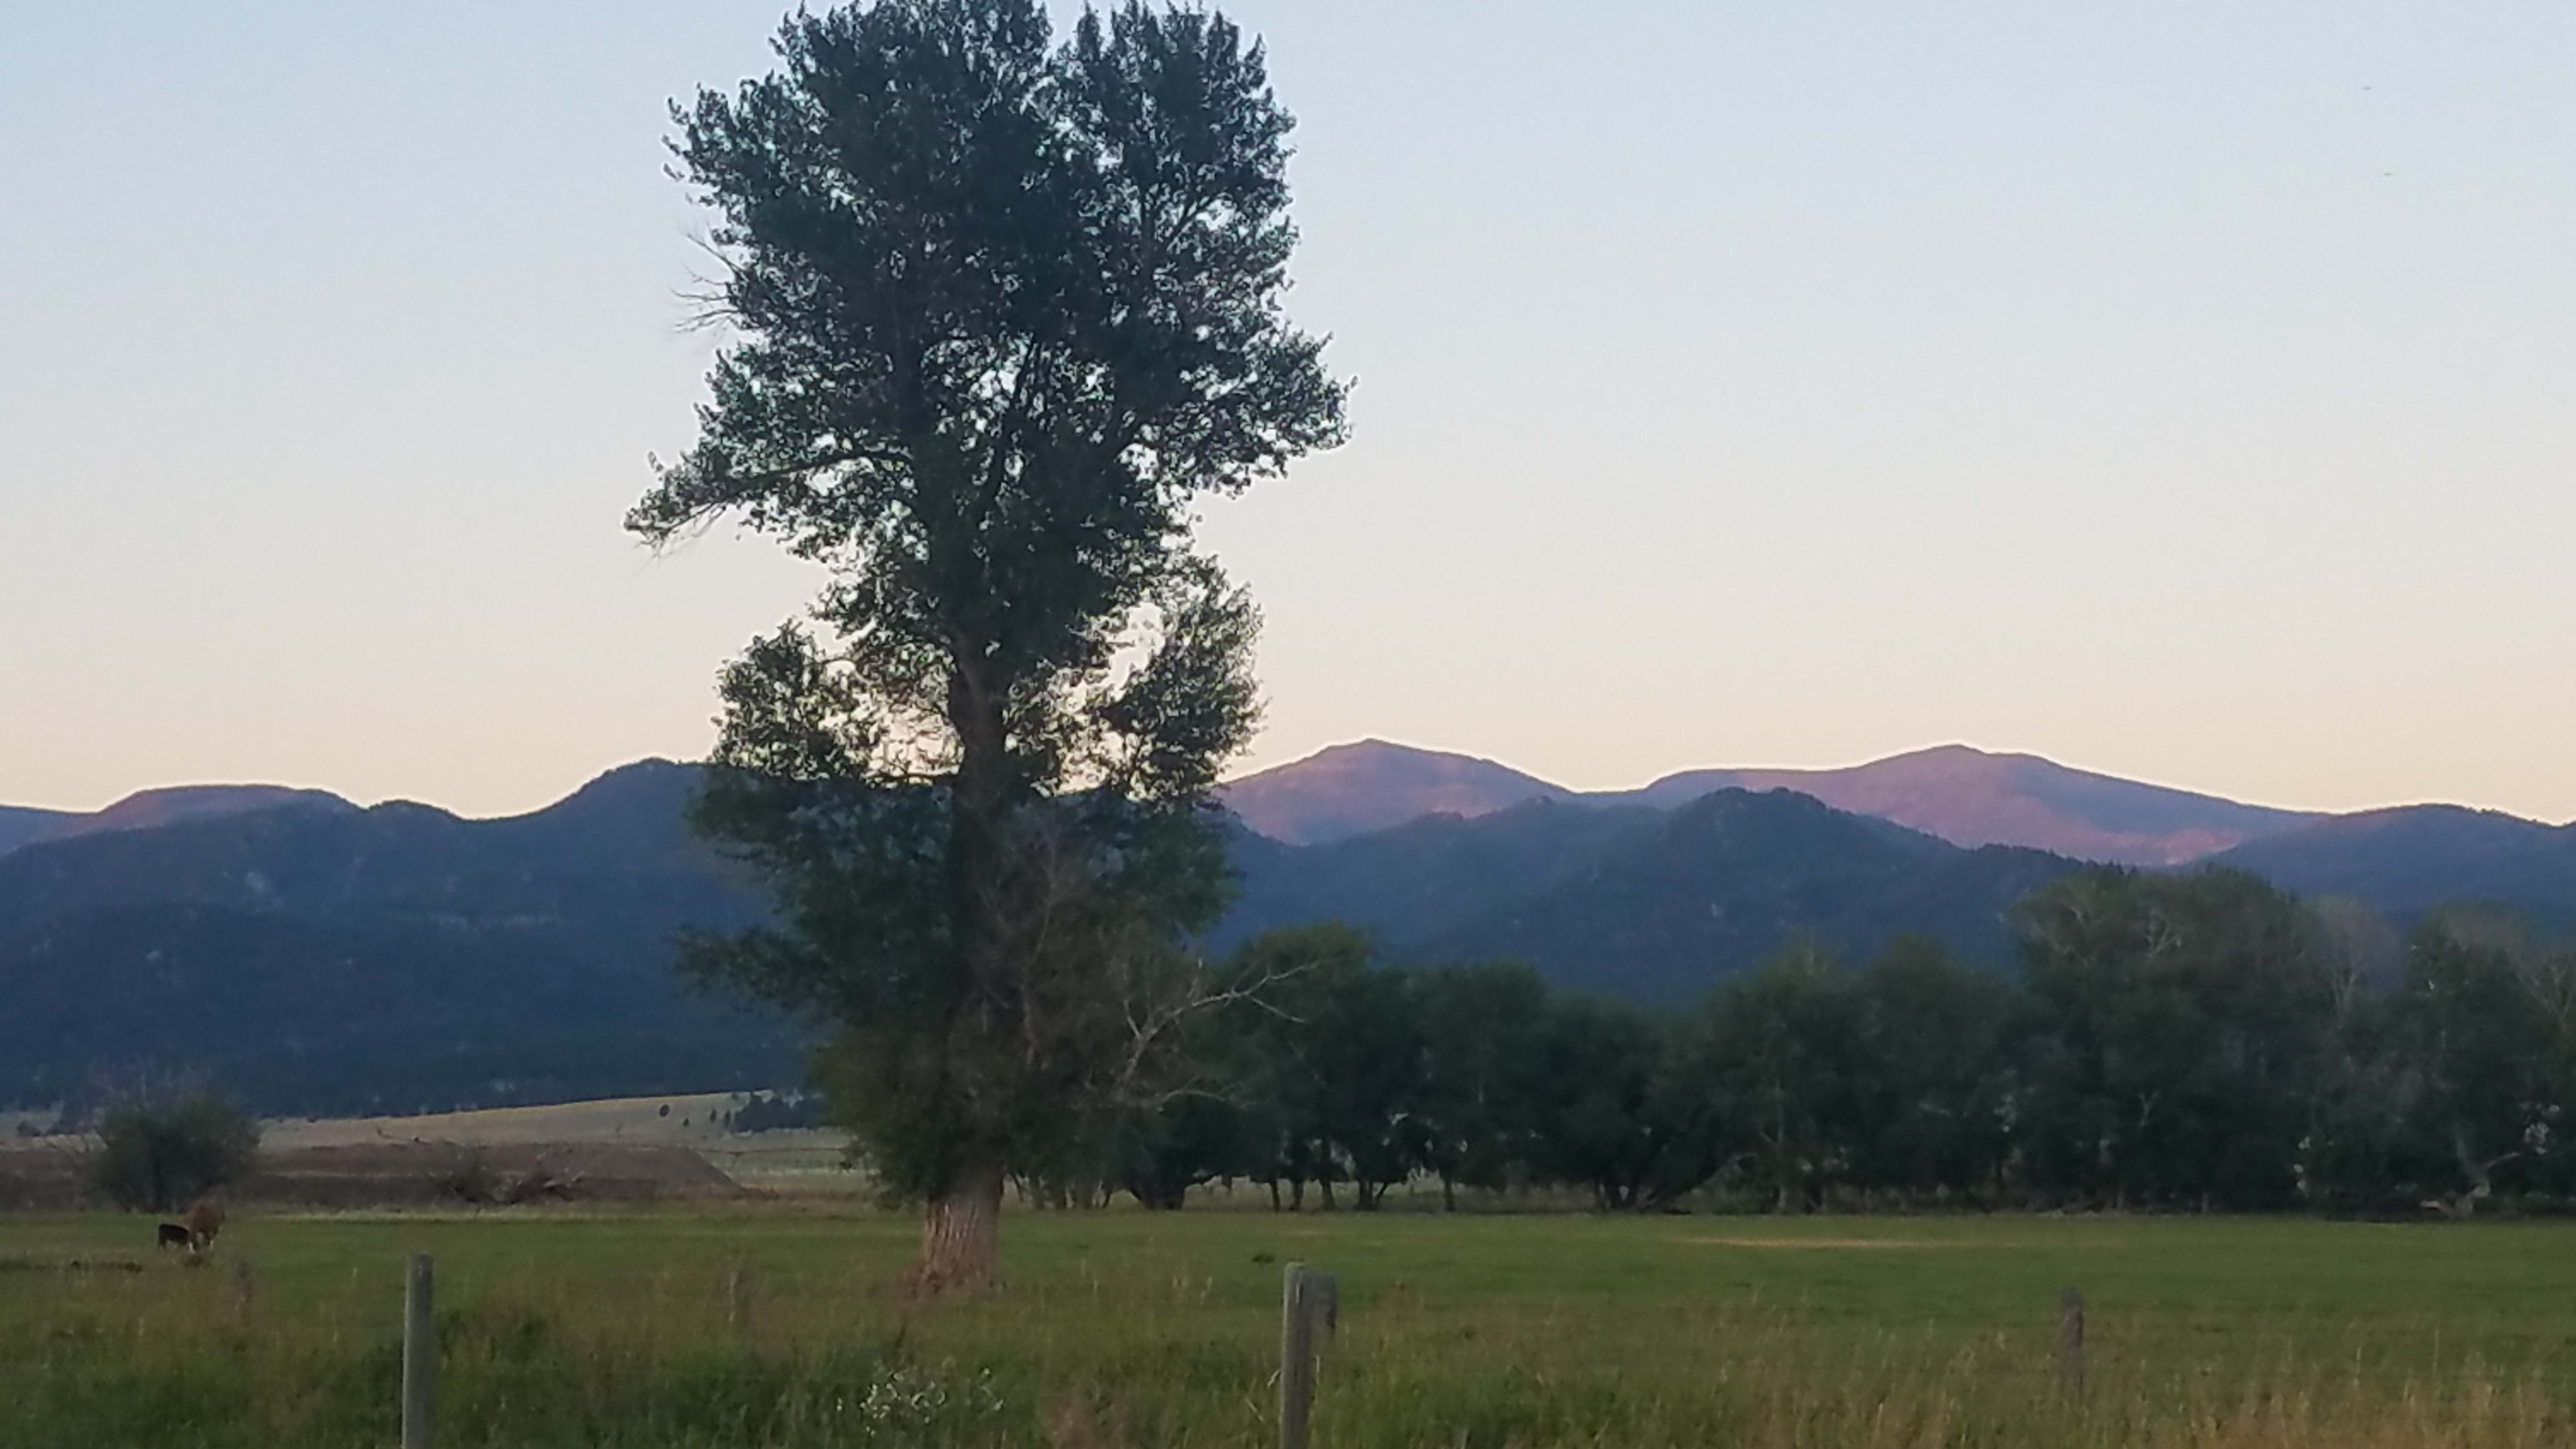 Purple Mountain Majesty: East View, Crow Peak. Tons of hiking opportunities, recreational sport vehicle trails, fishing, and hunting within minutes of Cow Dog Camp in the Elkhorn Mountains.